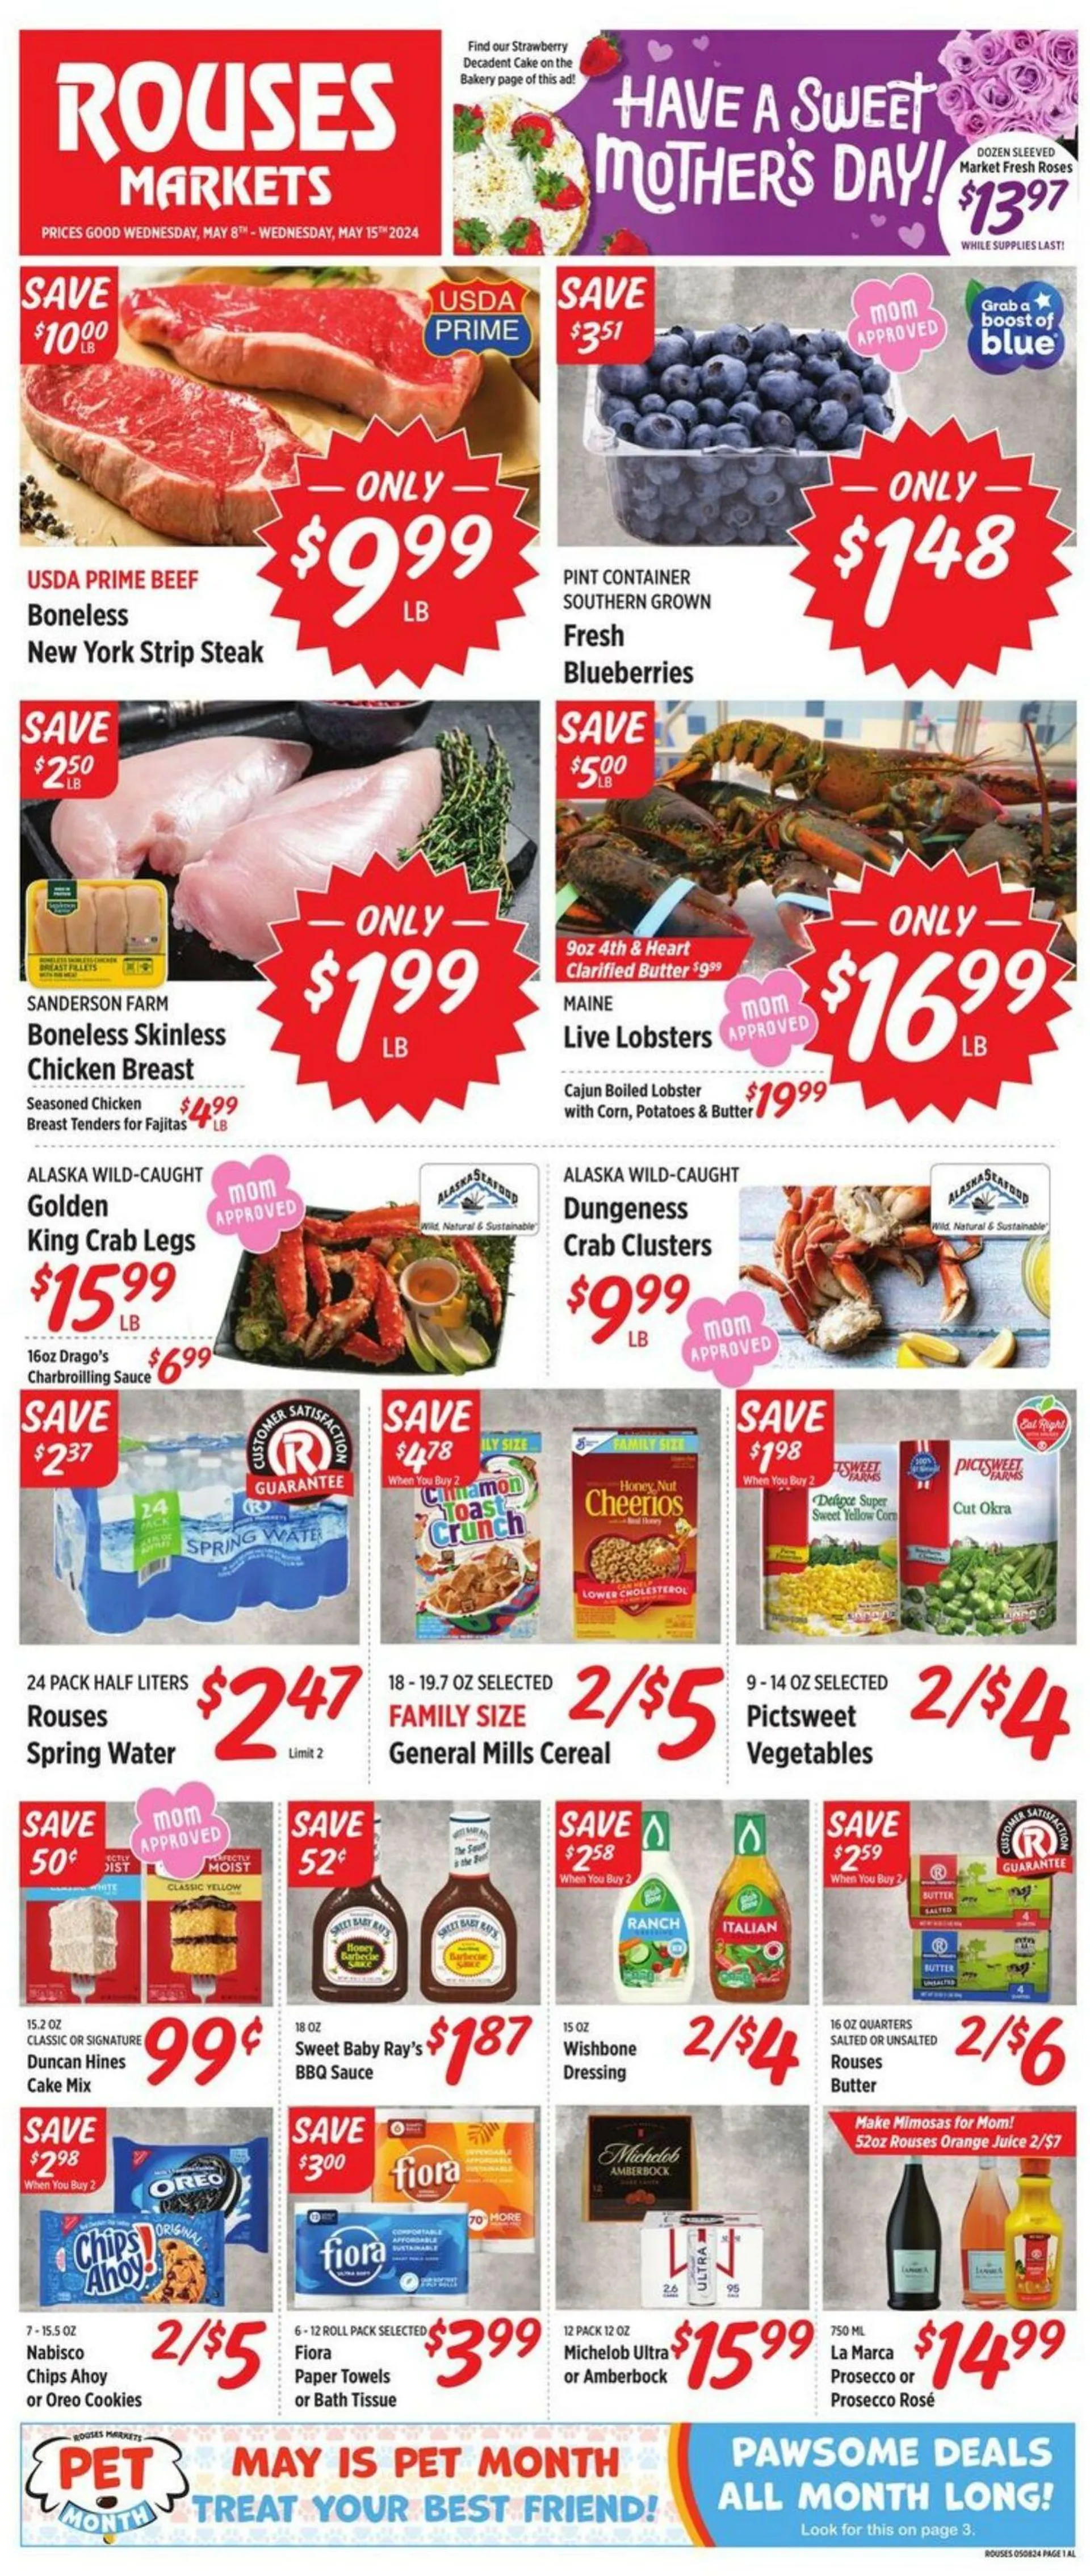 Rouses Current weekly ad - 1